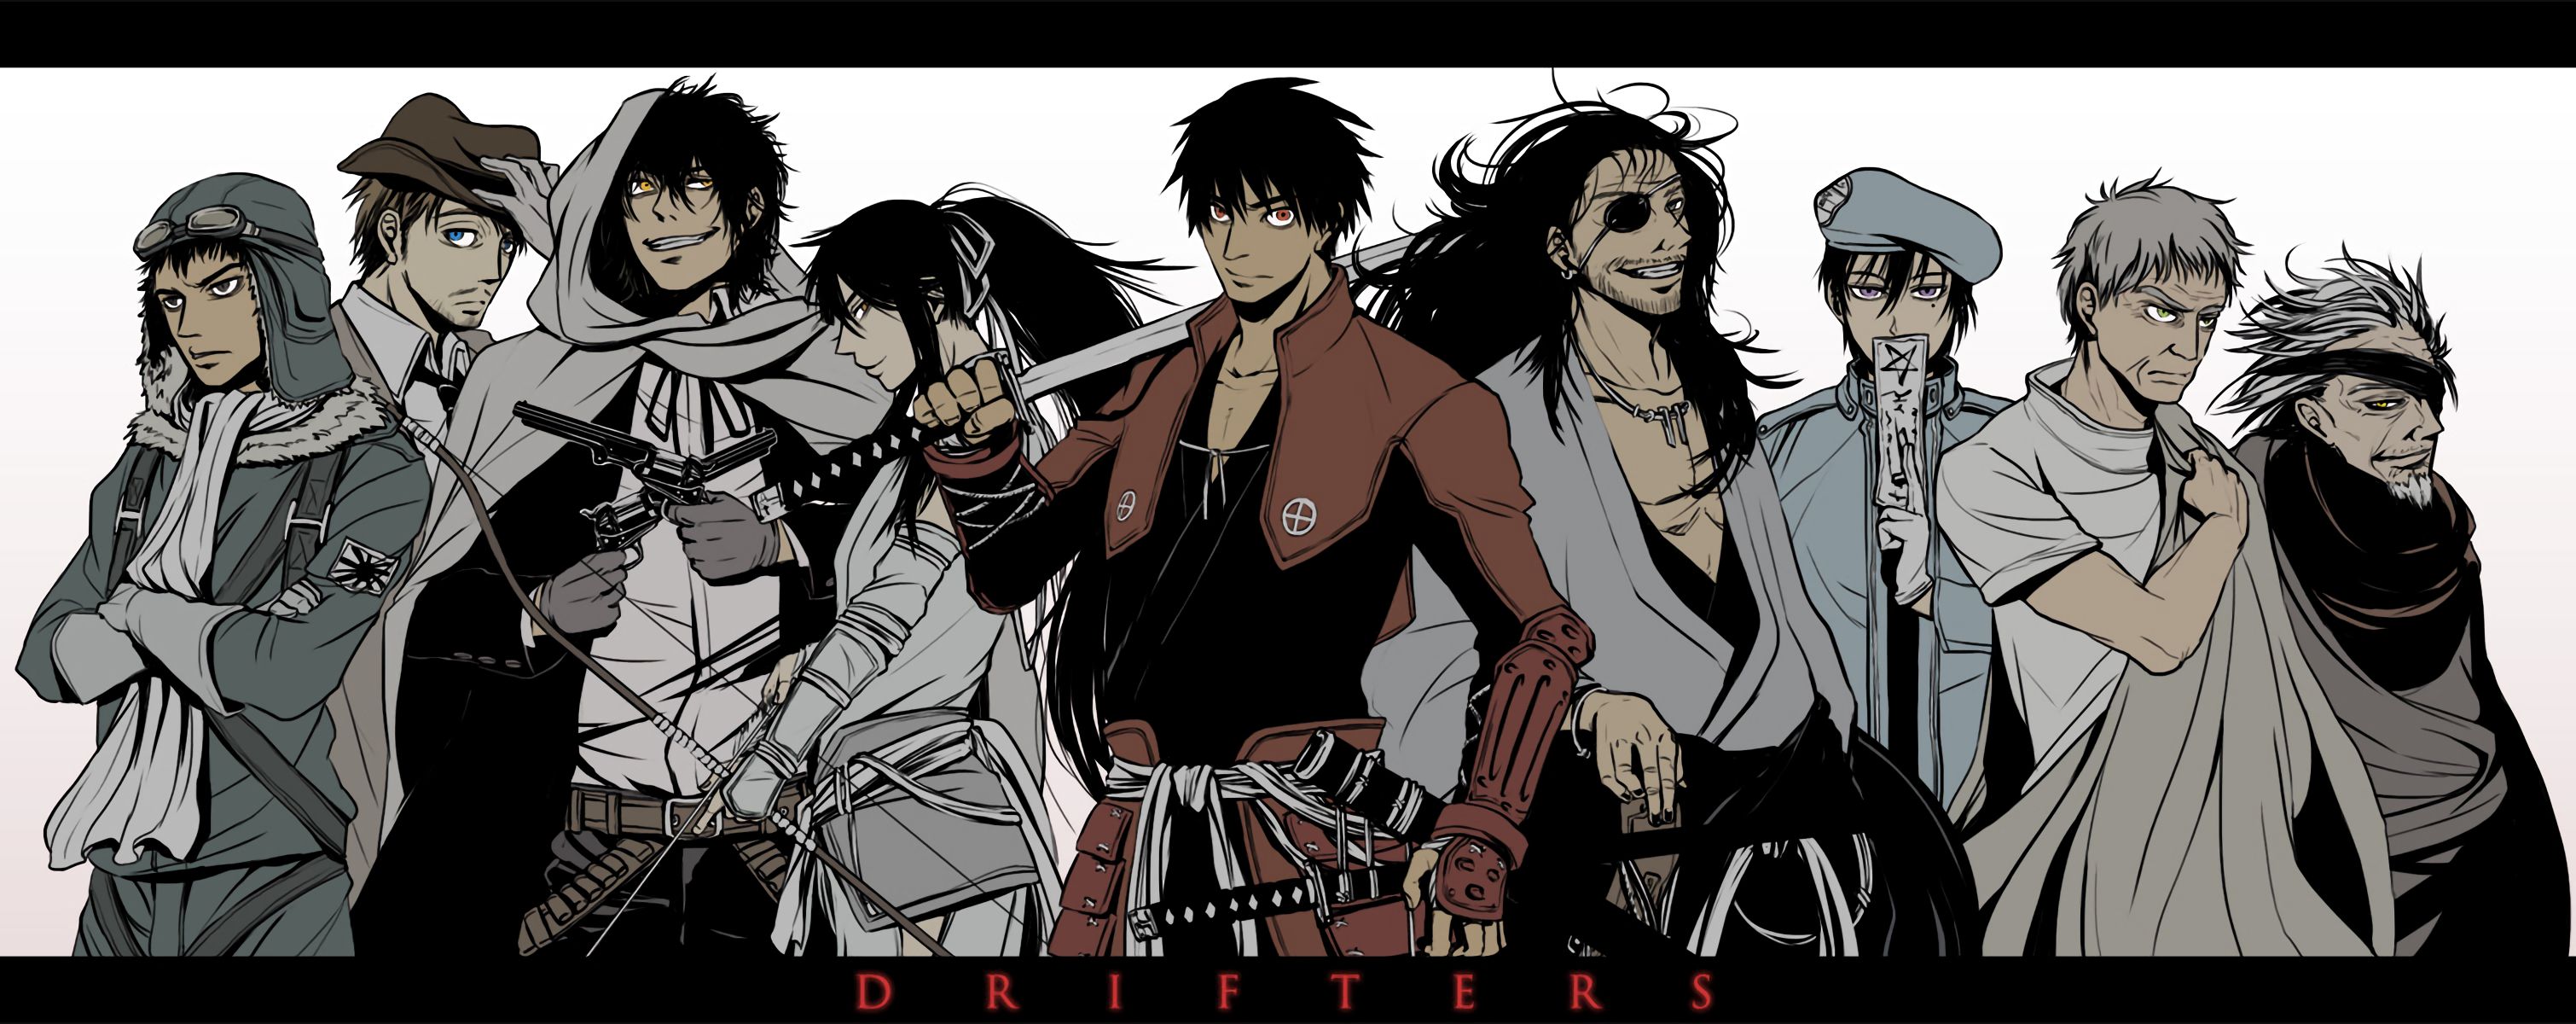 90+ Anime Drifters HD Wallpapers and Backgrounds